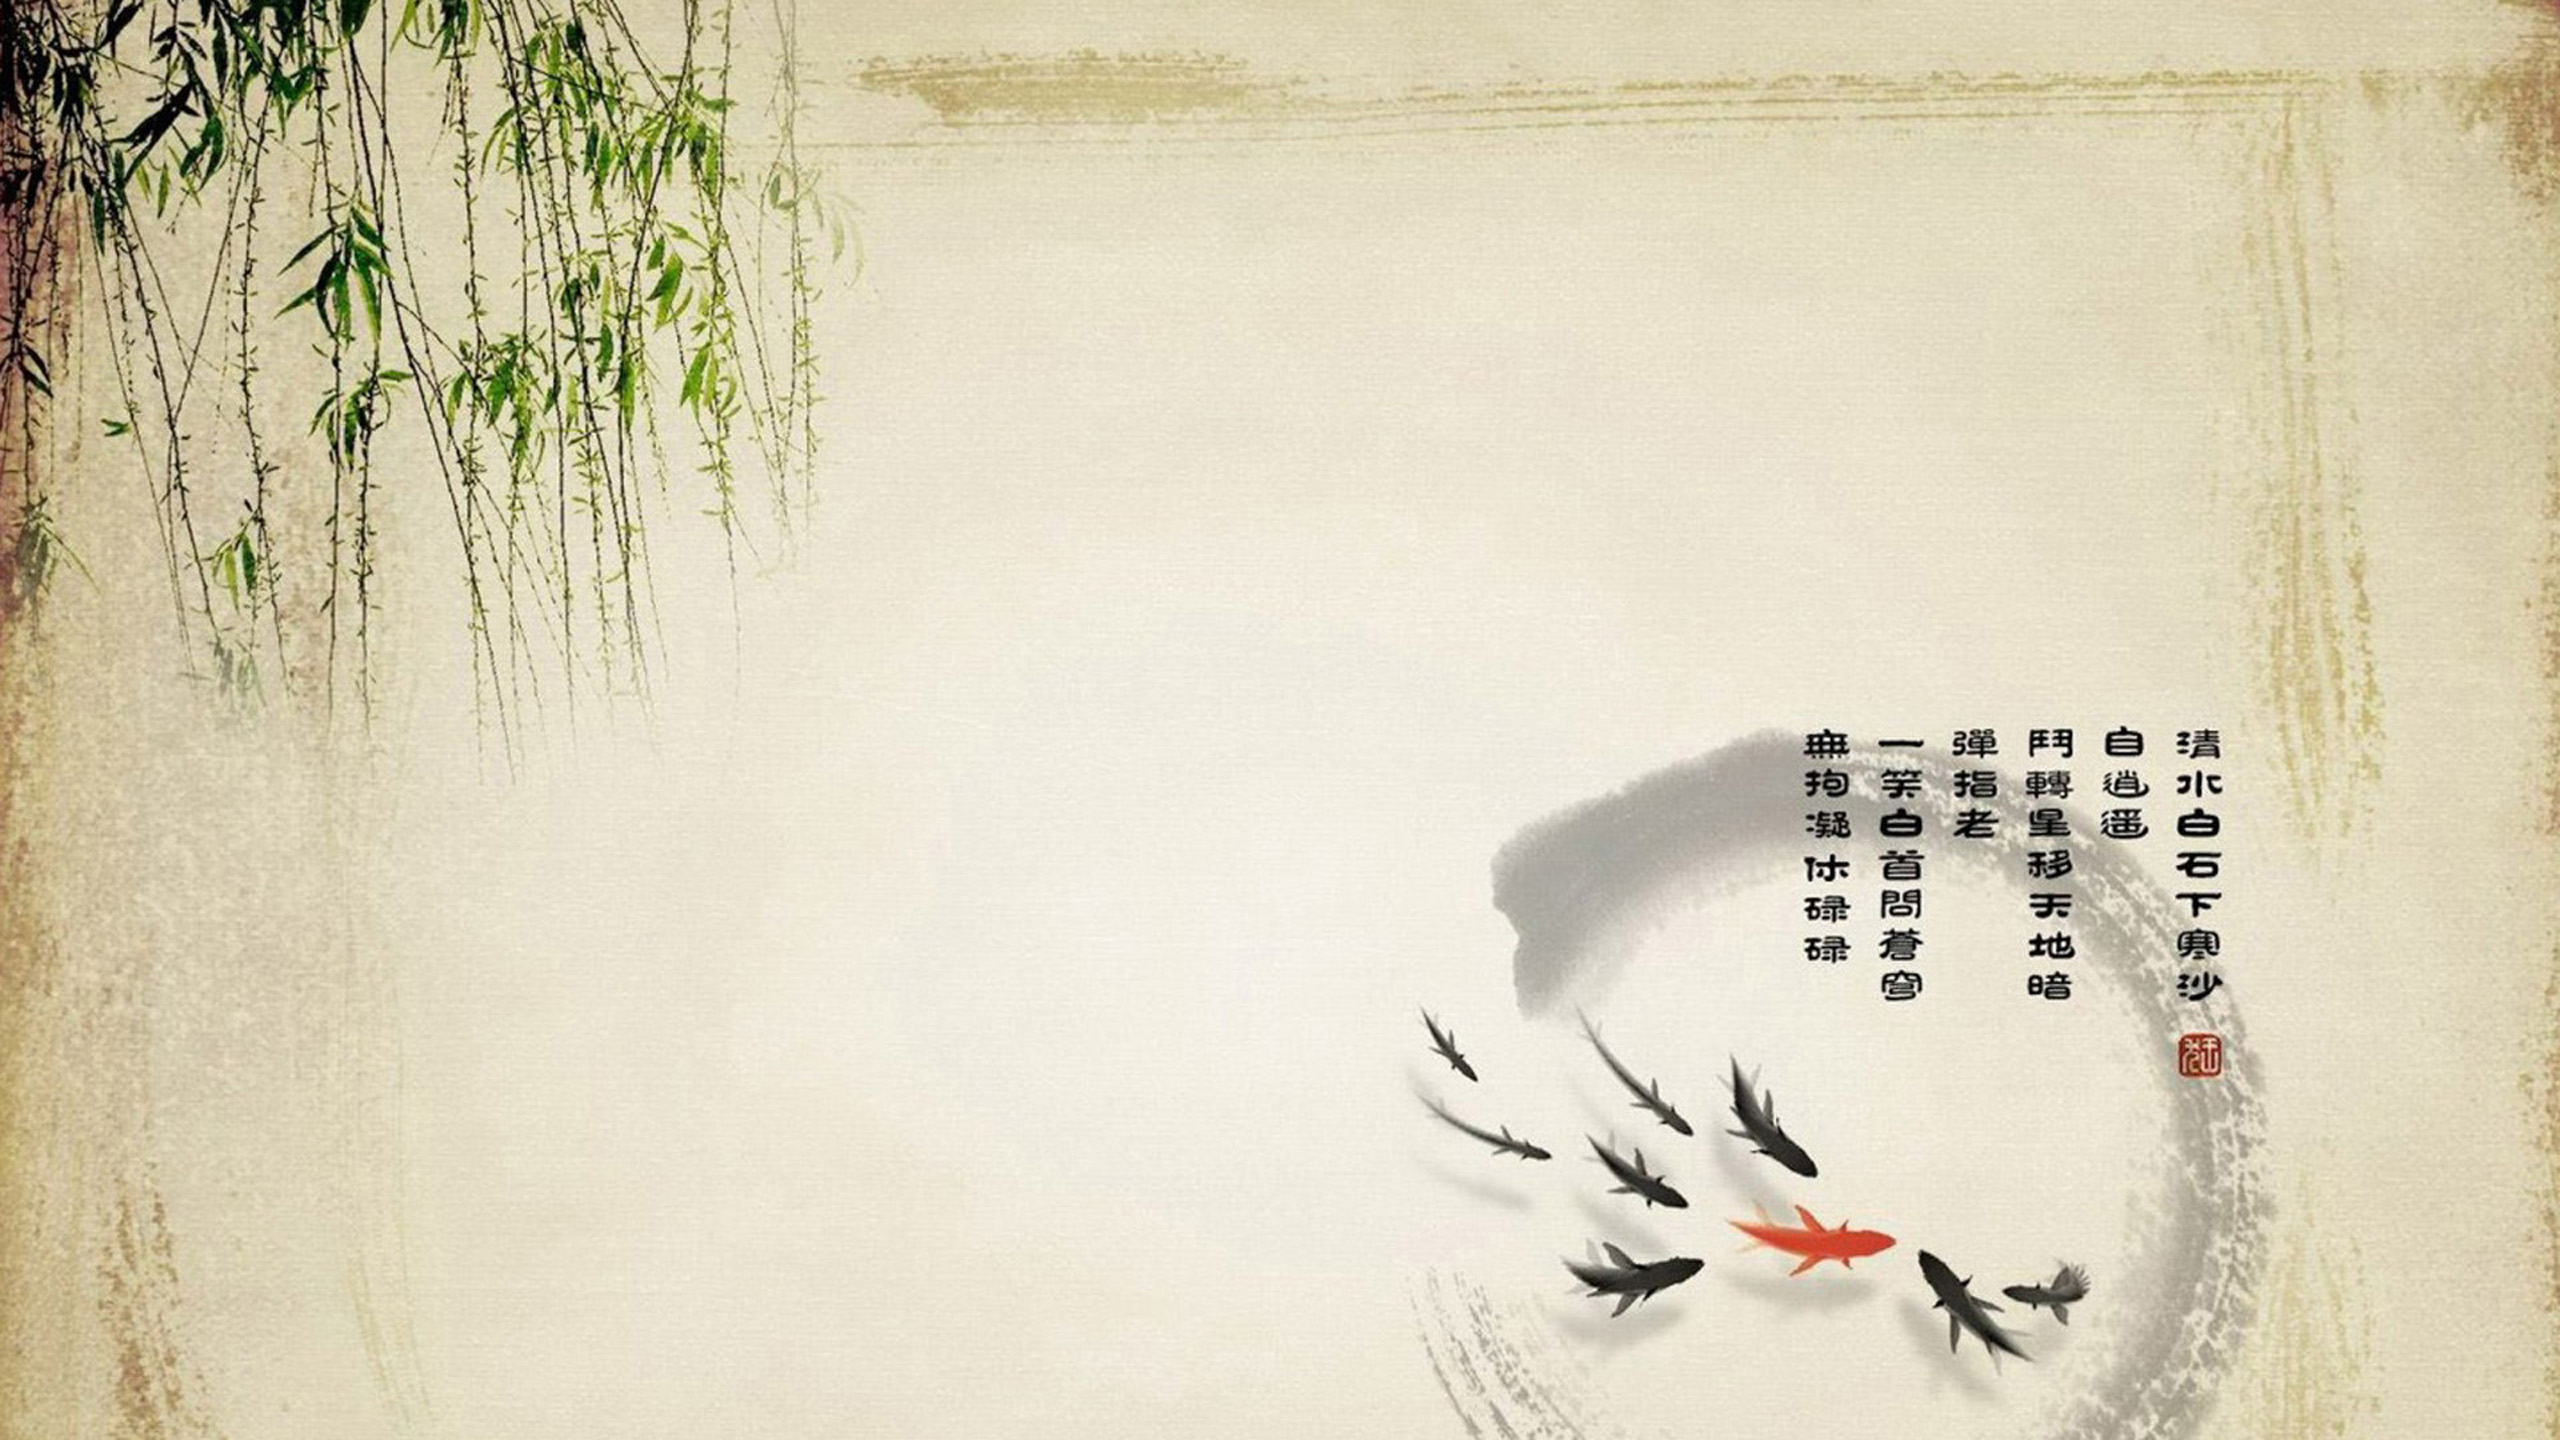 20 Top chinese art desktop wallpaper You Can Save It For Free ...